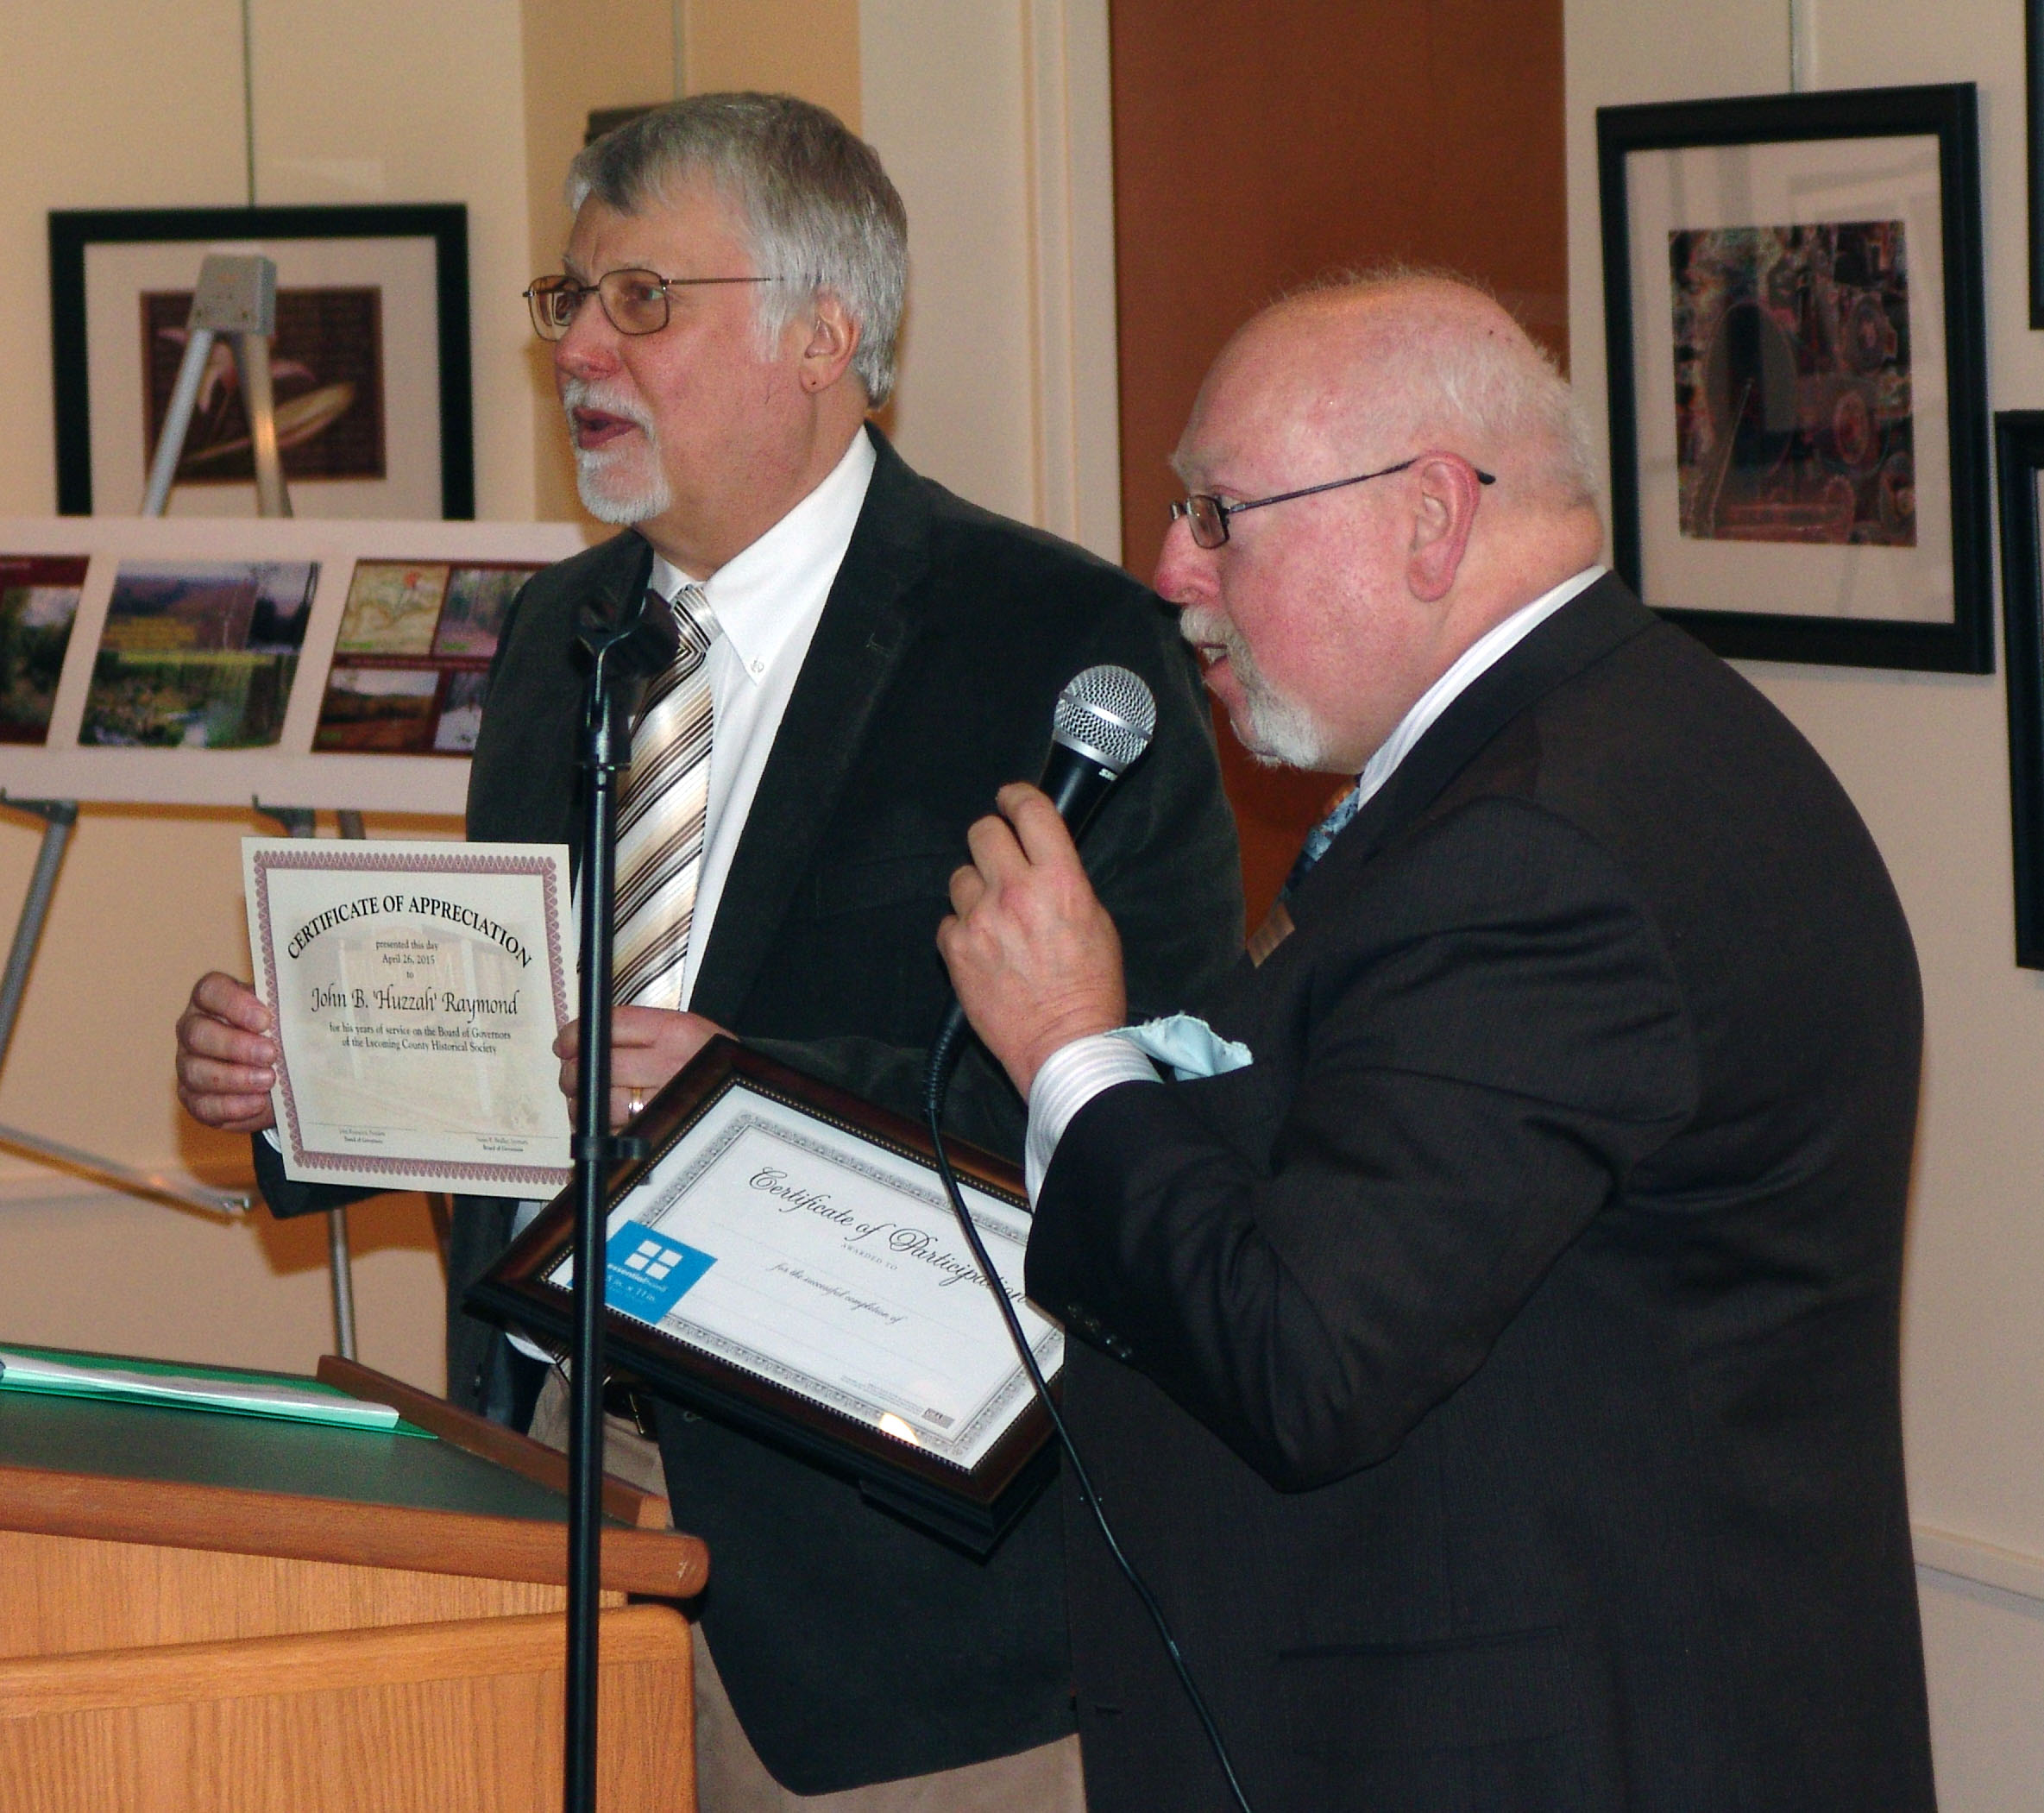 Director Gary Parks presented outgoing Board President John Raymond with a certificate of appreciation.